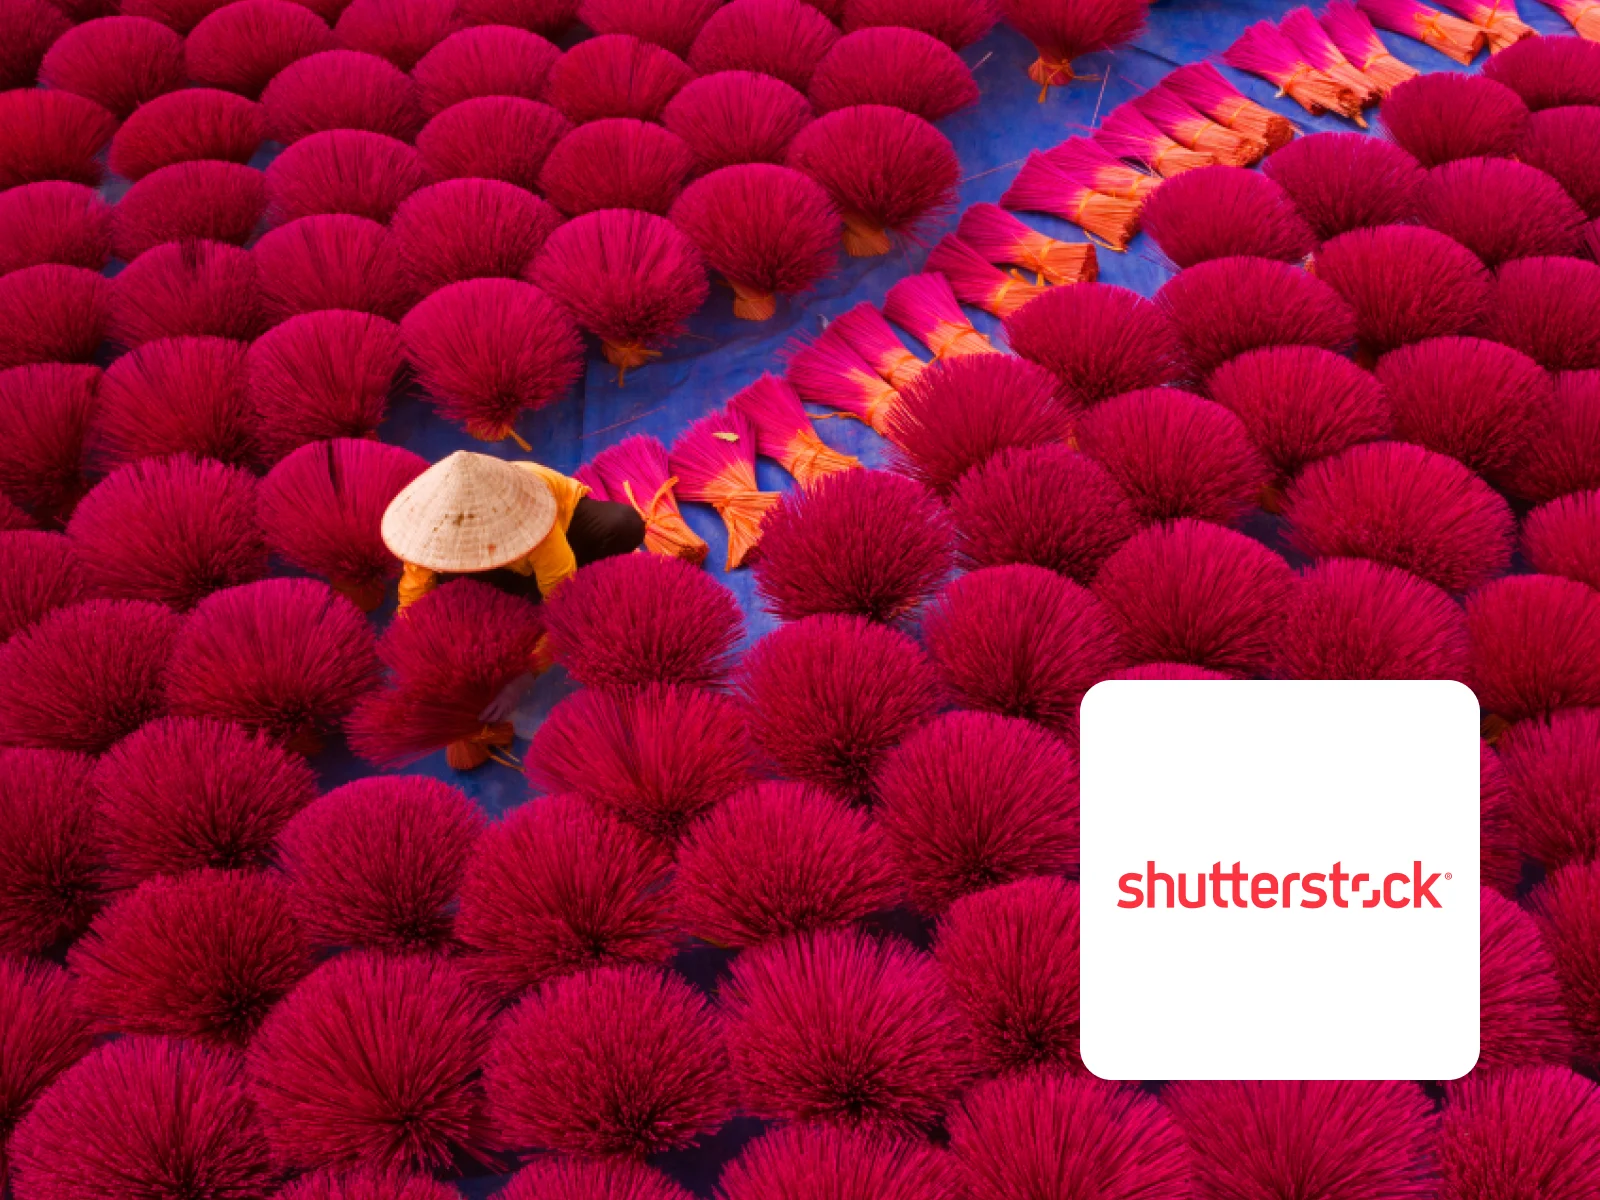 Decorative: An image from Shutterstock with lots of colors